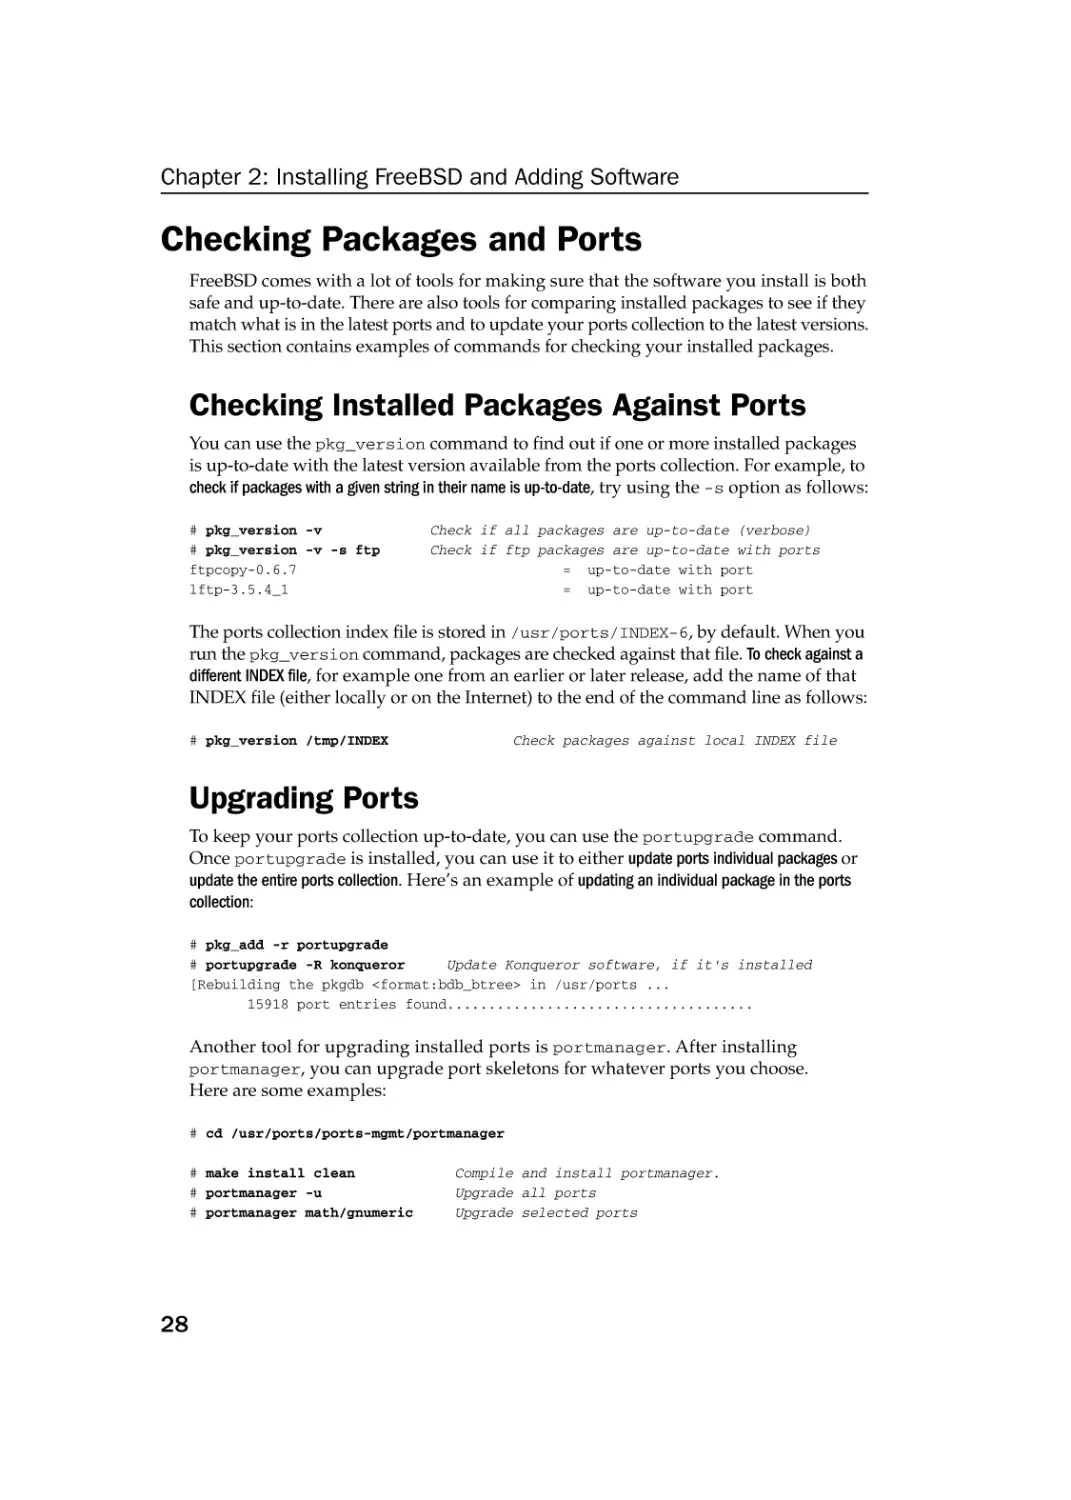 Checking Packages and Ports